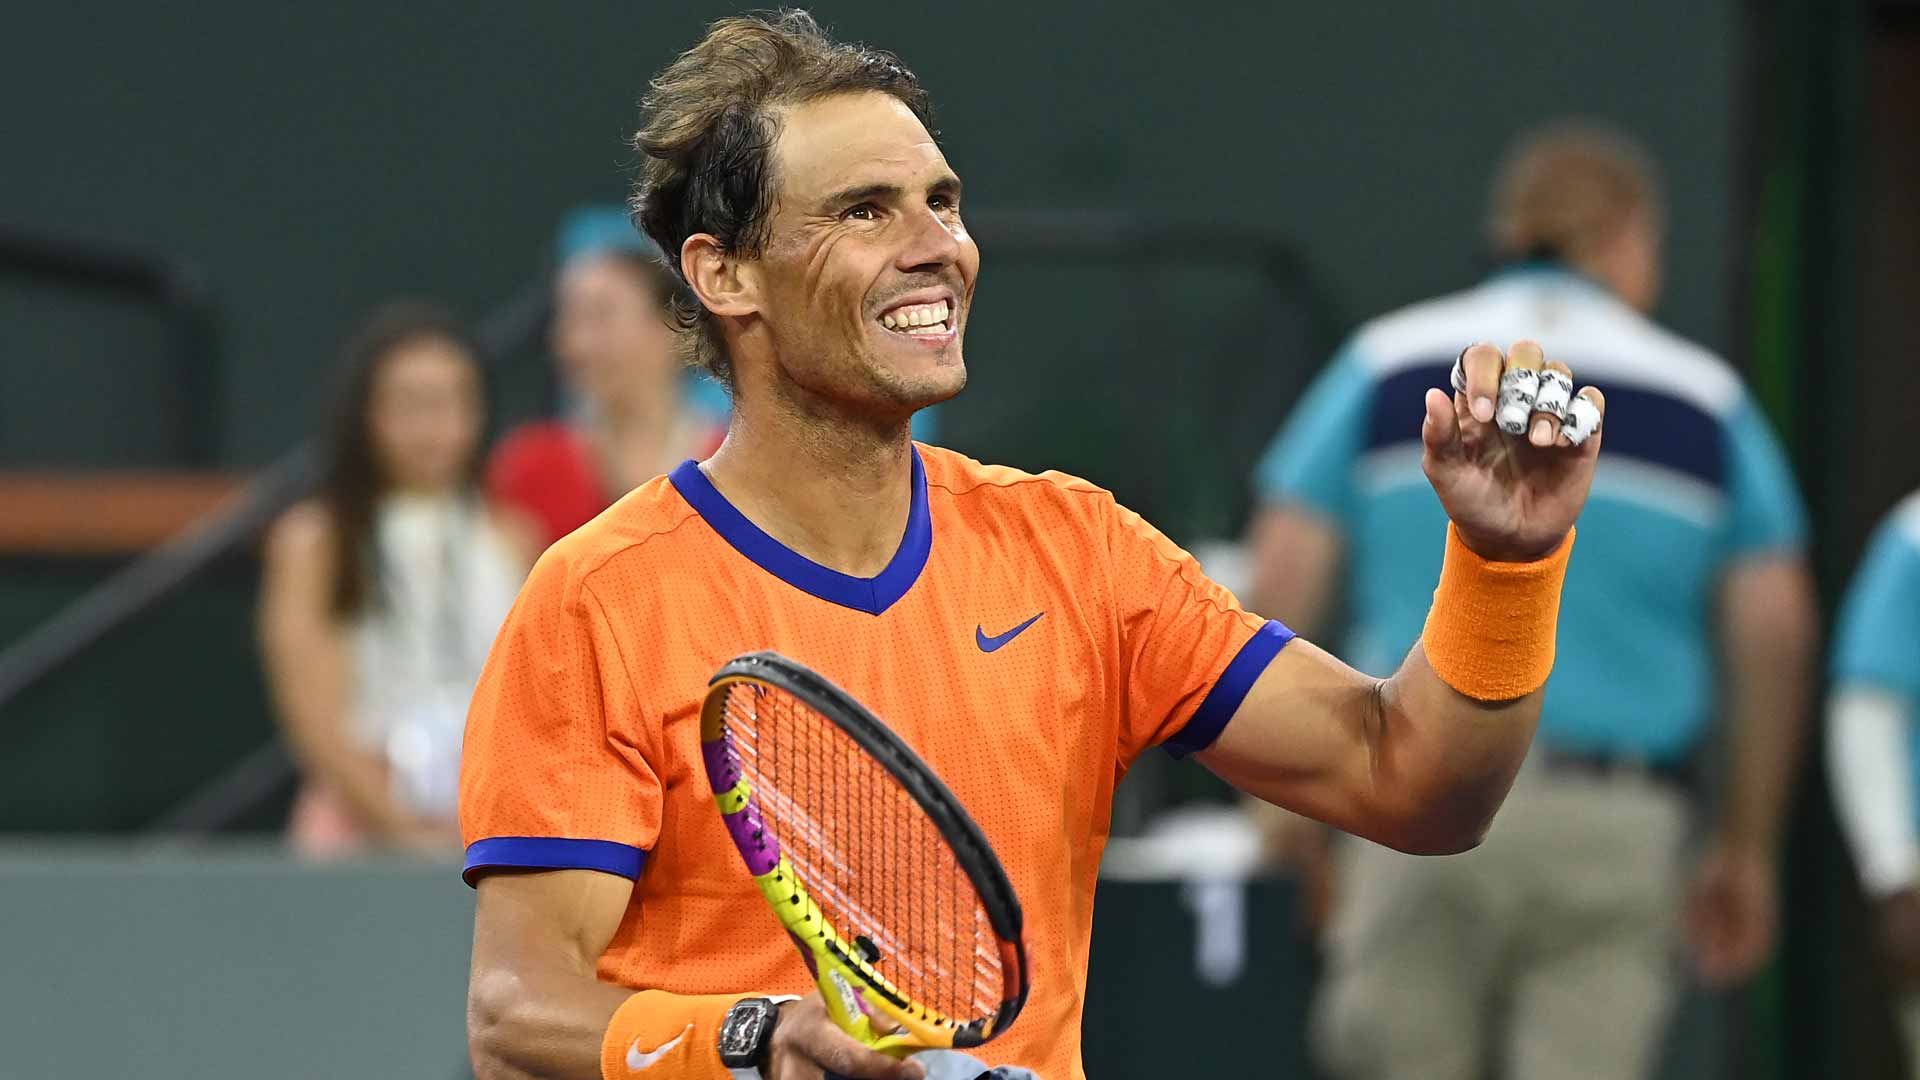 Find out when Rafael Nadal will play first round at Indian Wells